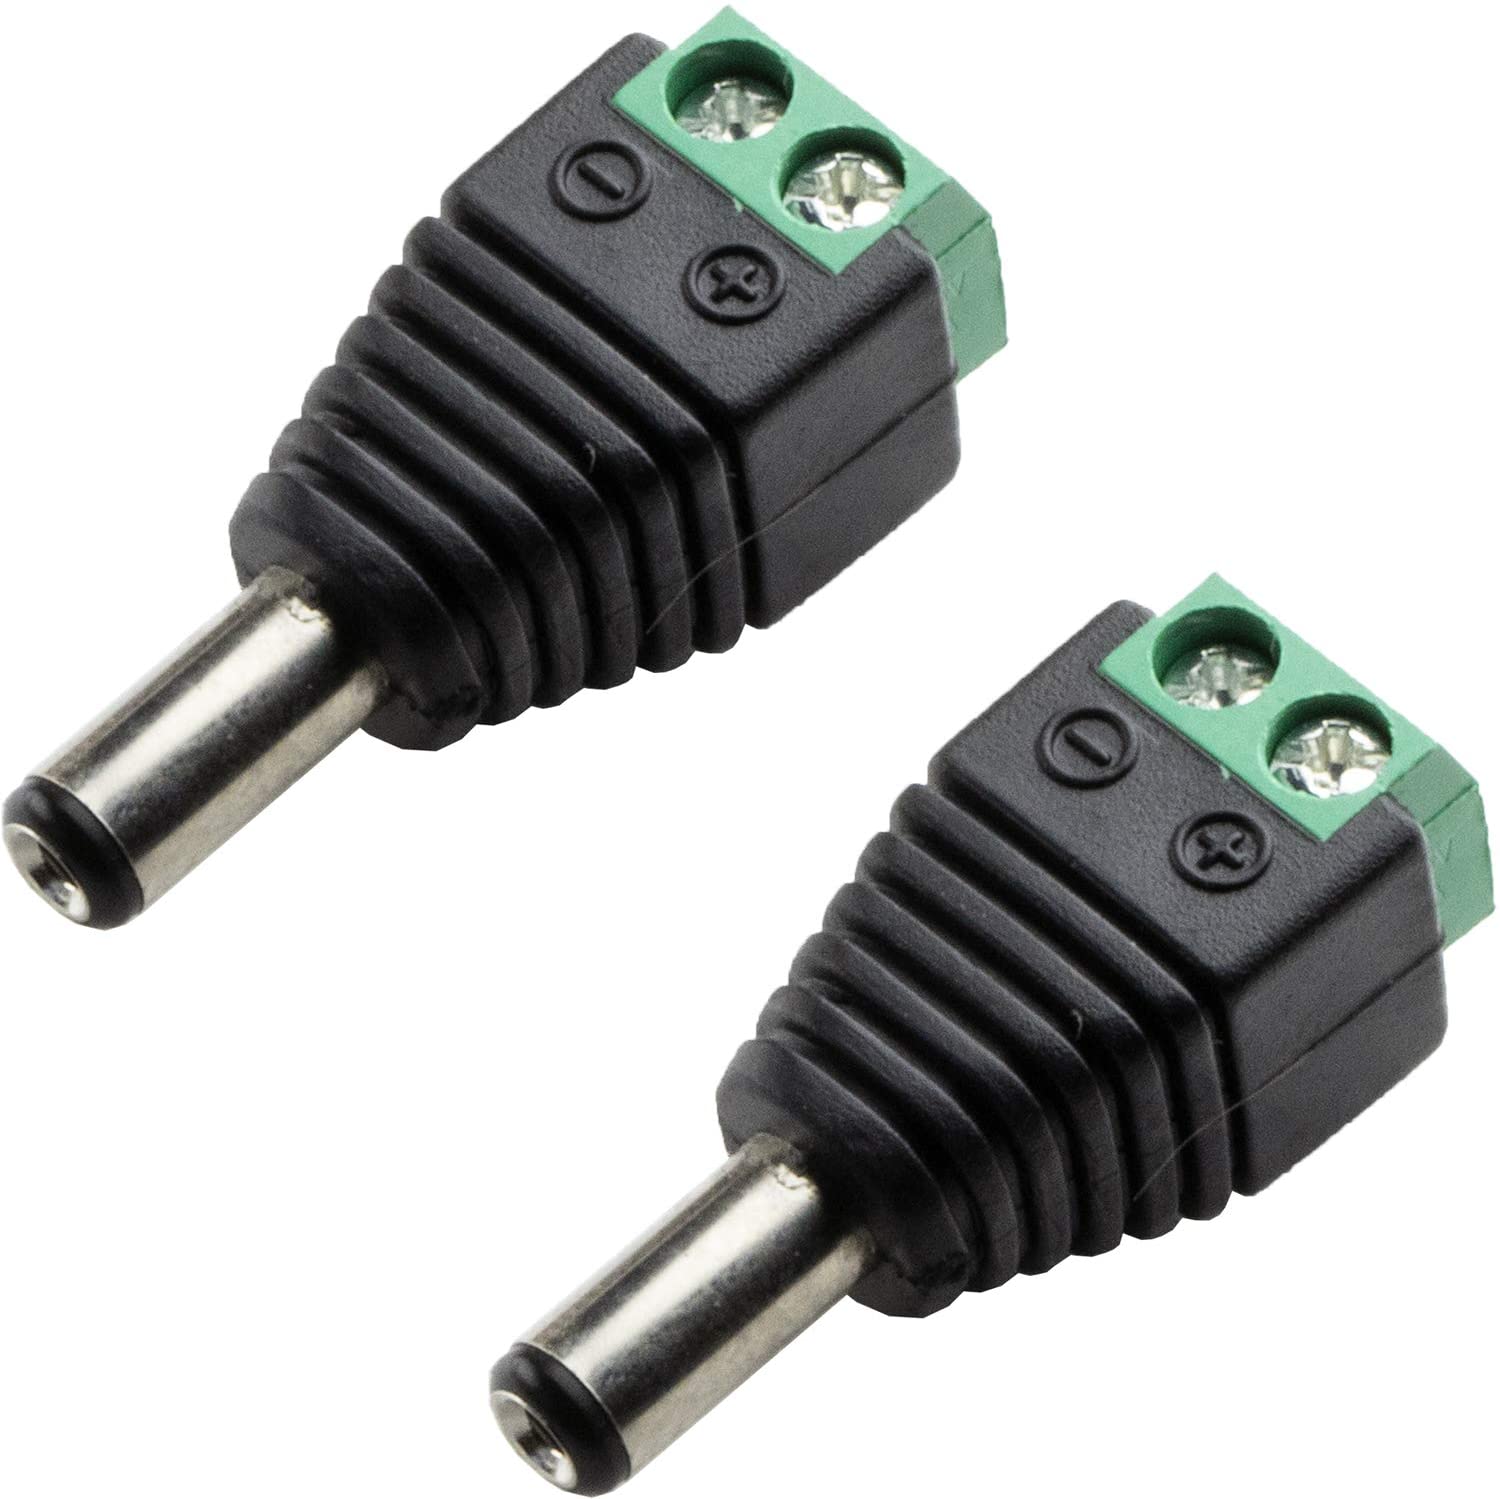 flashtree 2pcs 12V Male 5.5x2.1mm 2.0mm DC Power Jack Plug Adapter Connector for CCTV Camera